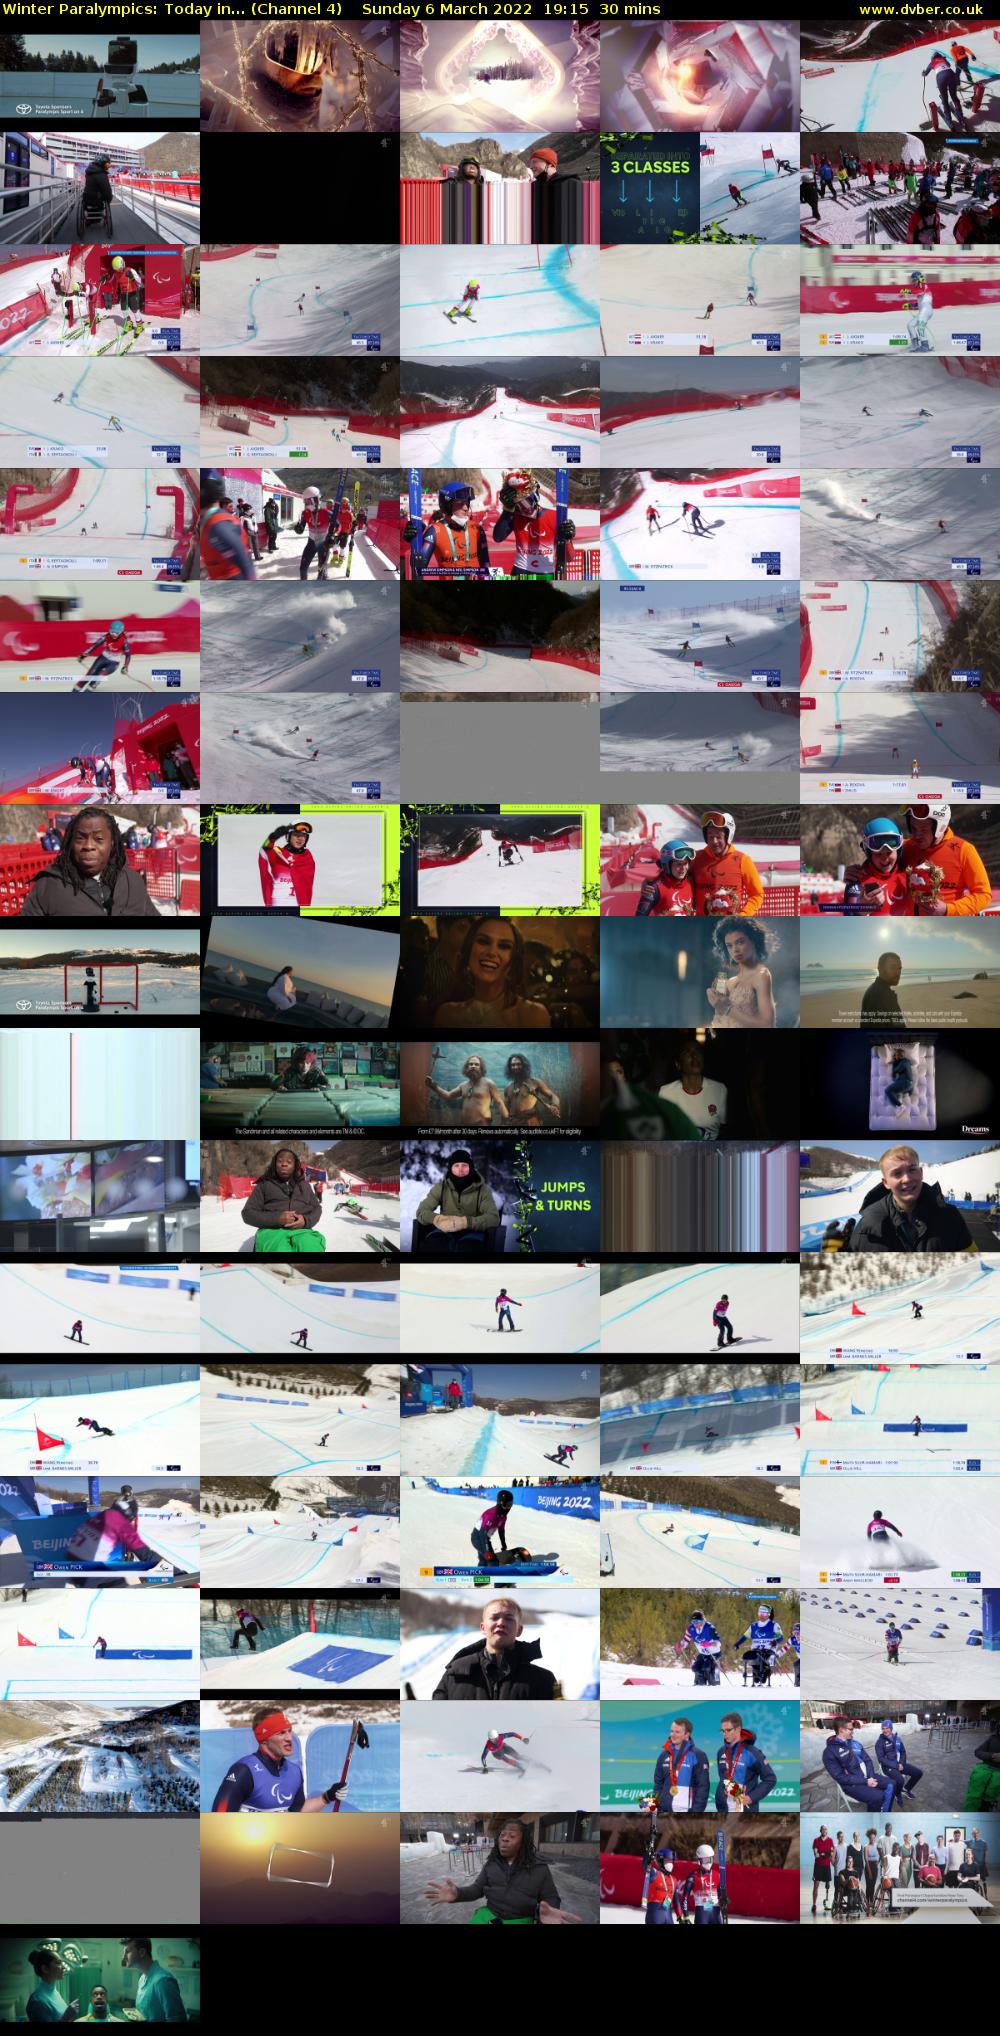 Winter Paralympics: Today in... (Channel 4) Sunday 6 March 2022 19:15 - 19:45